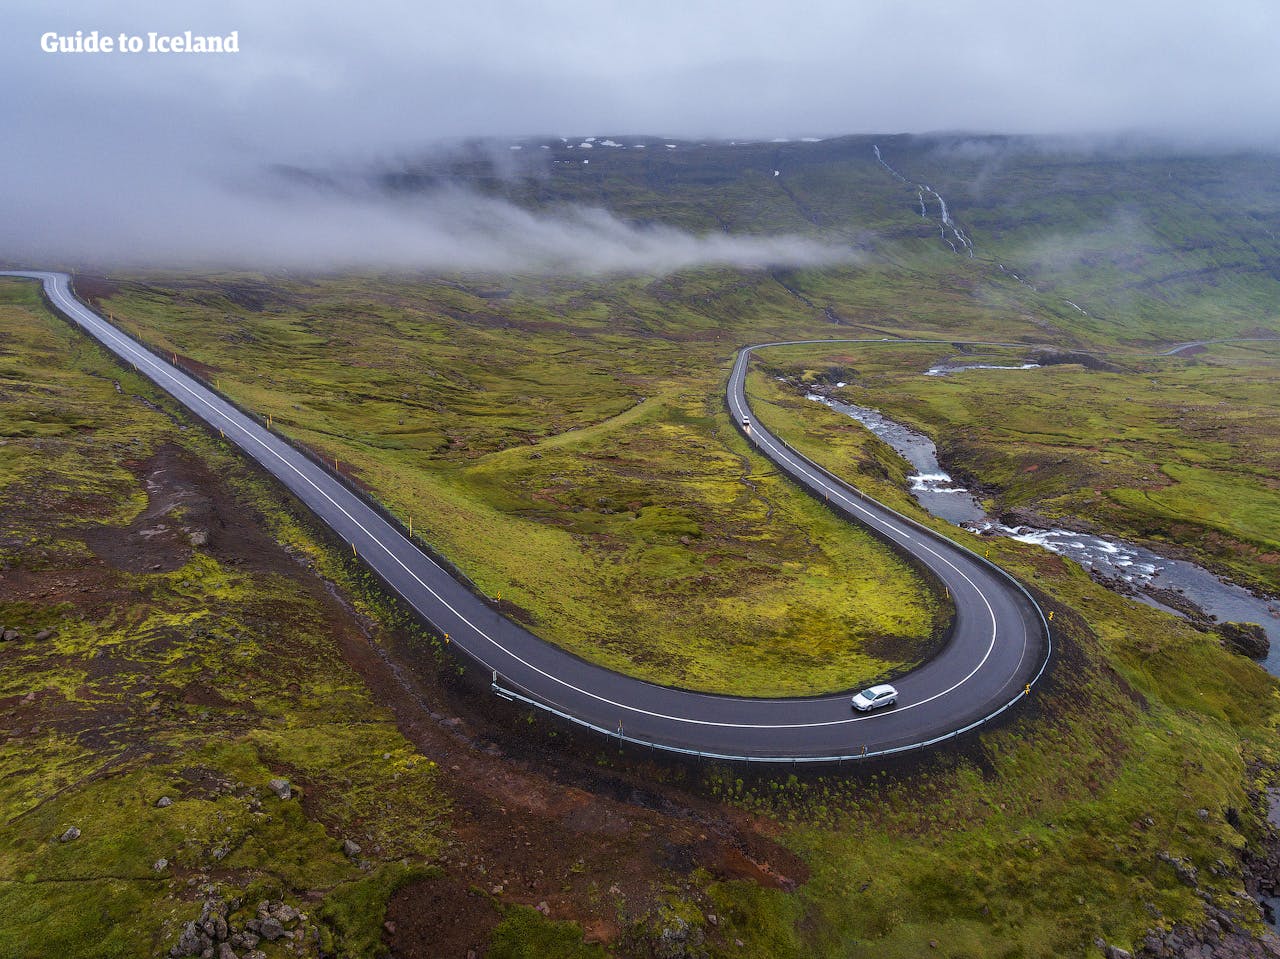 Driving the twisting mountain road of Seyðisfjörður in the East Fjords of Iceland.